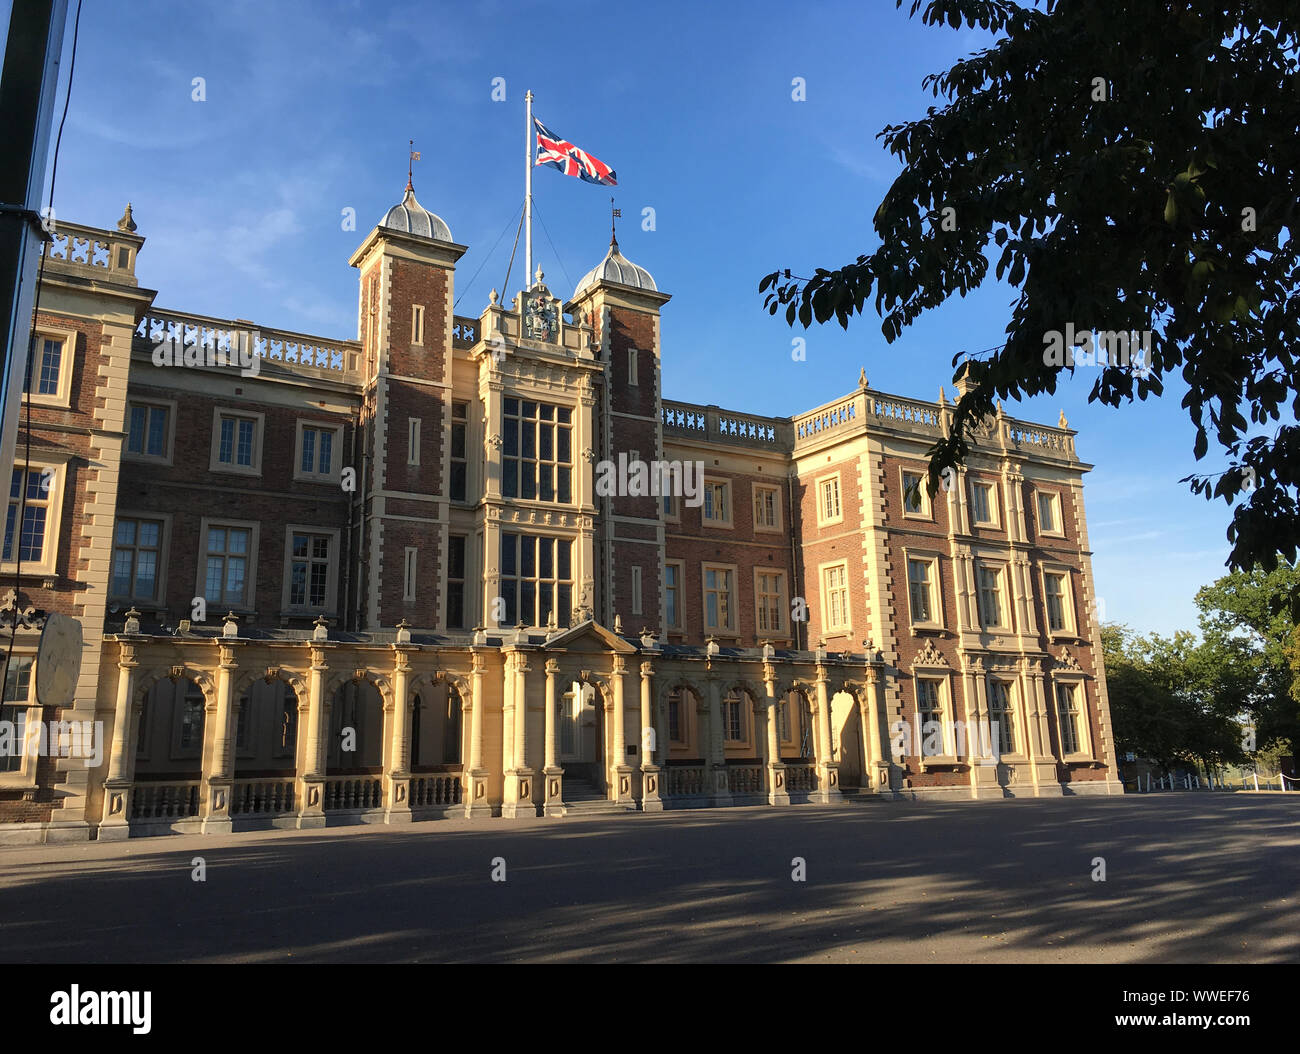 Kneller Hall, Whitton, Twickenham, which houses the Royal Military School of Music, and is home to the Museum of Army Music. UK. (stokmo) Stock Photo